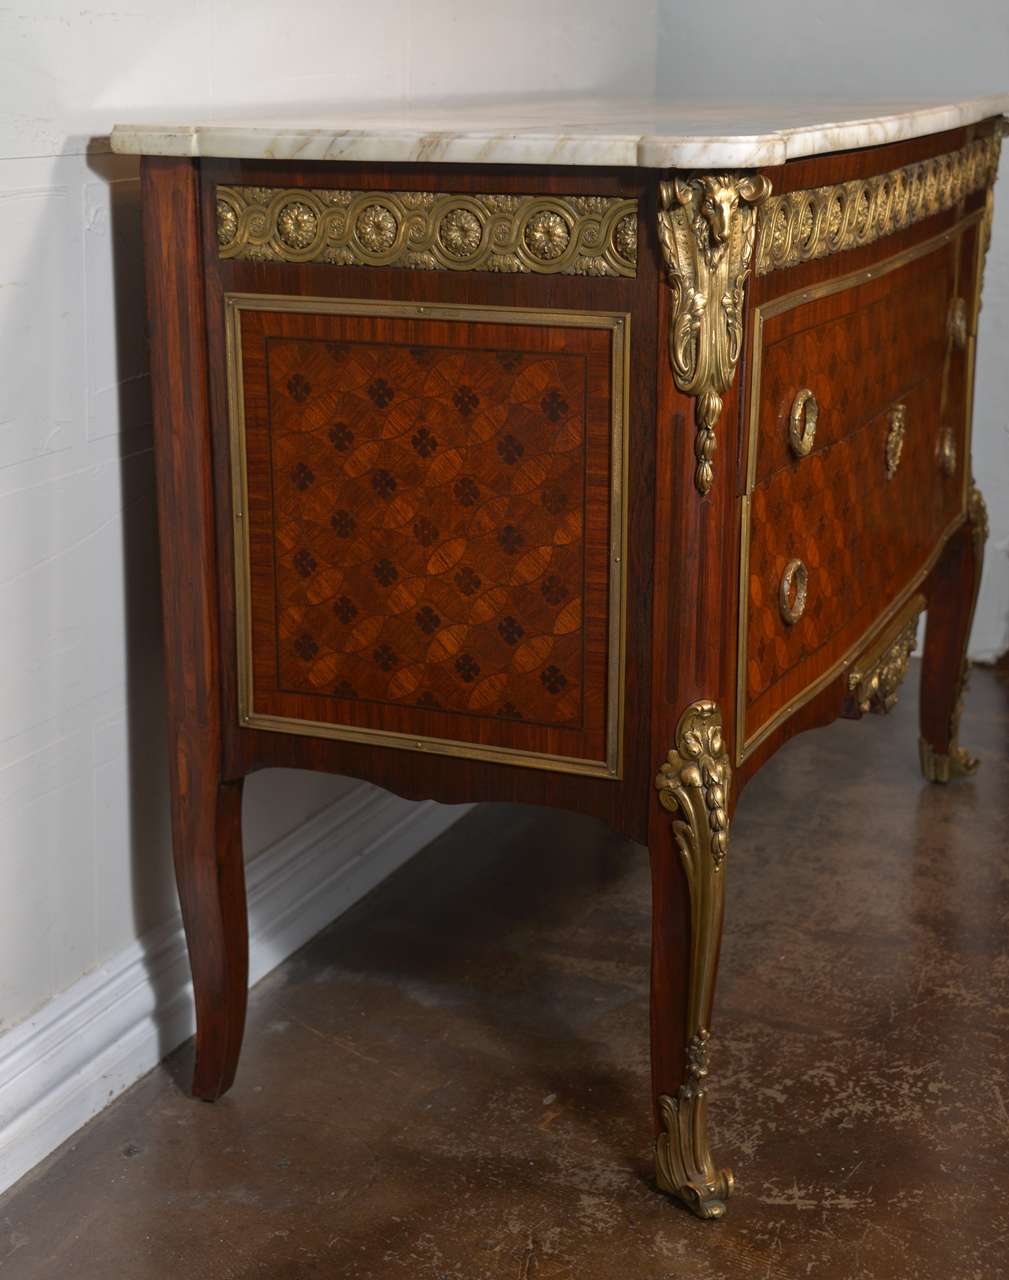 19th c. Louis XVI Mahogany and Parquetry Inlay In Excellent Condition For Sale In Dallas, TX